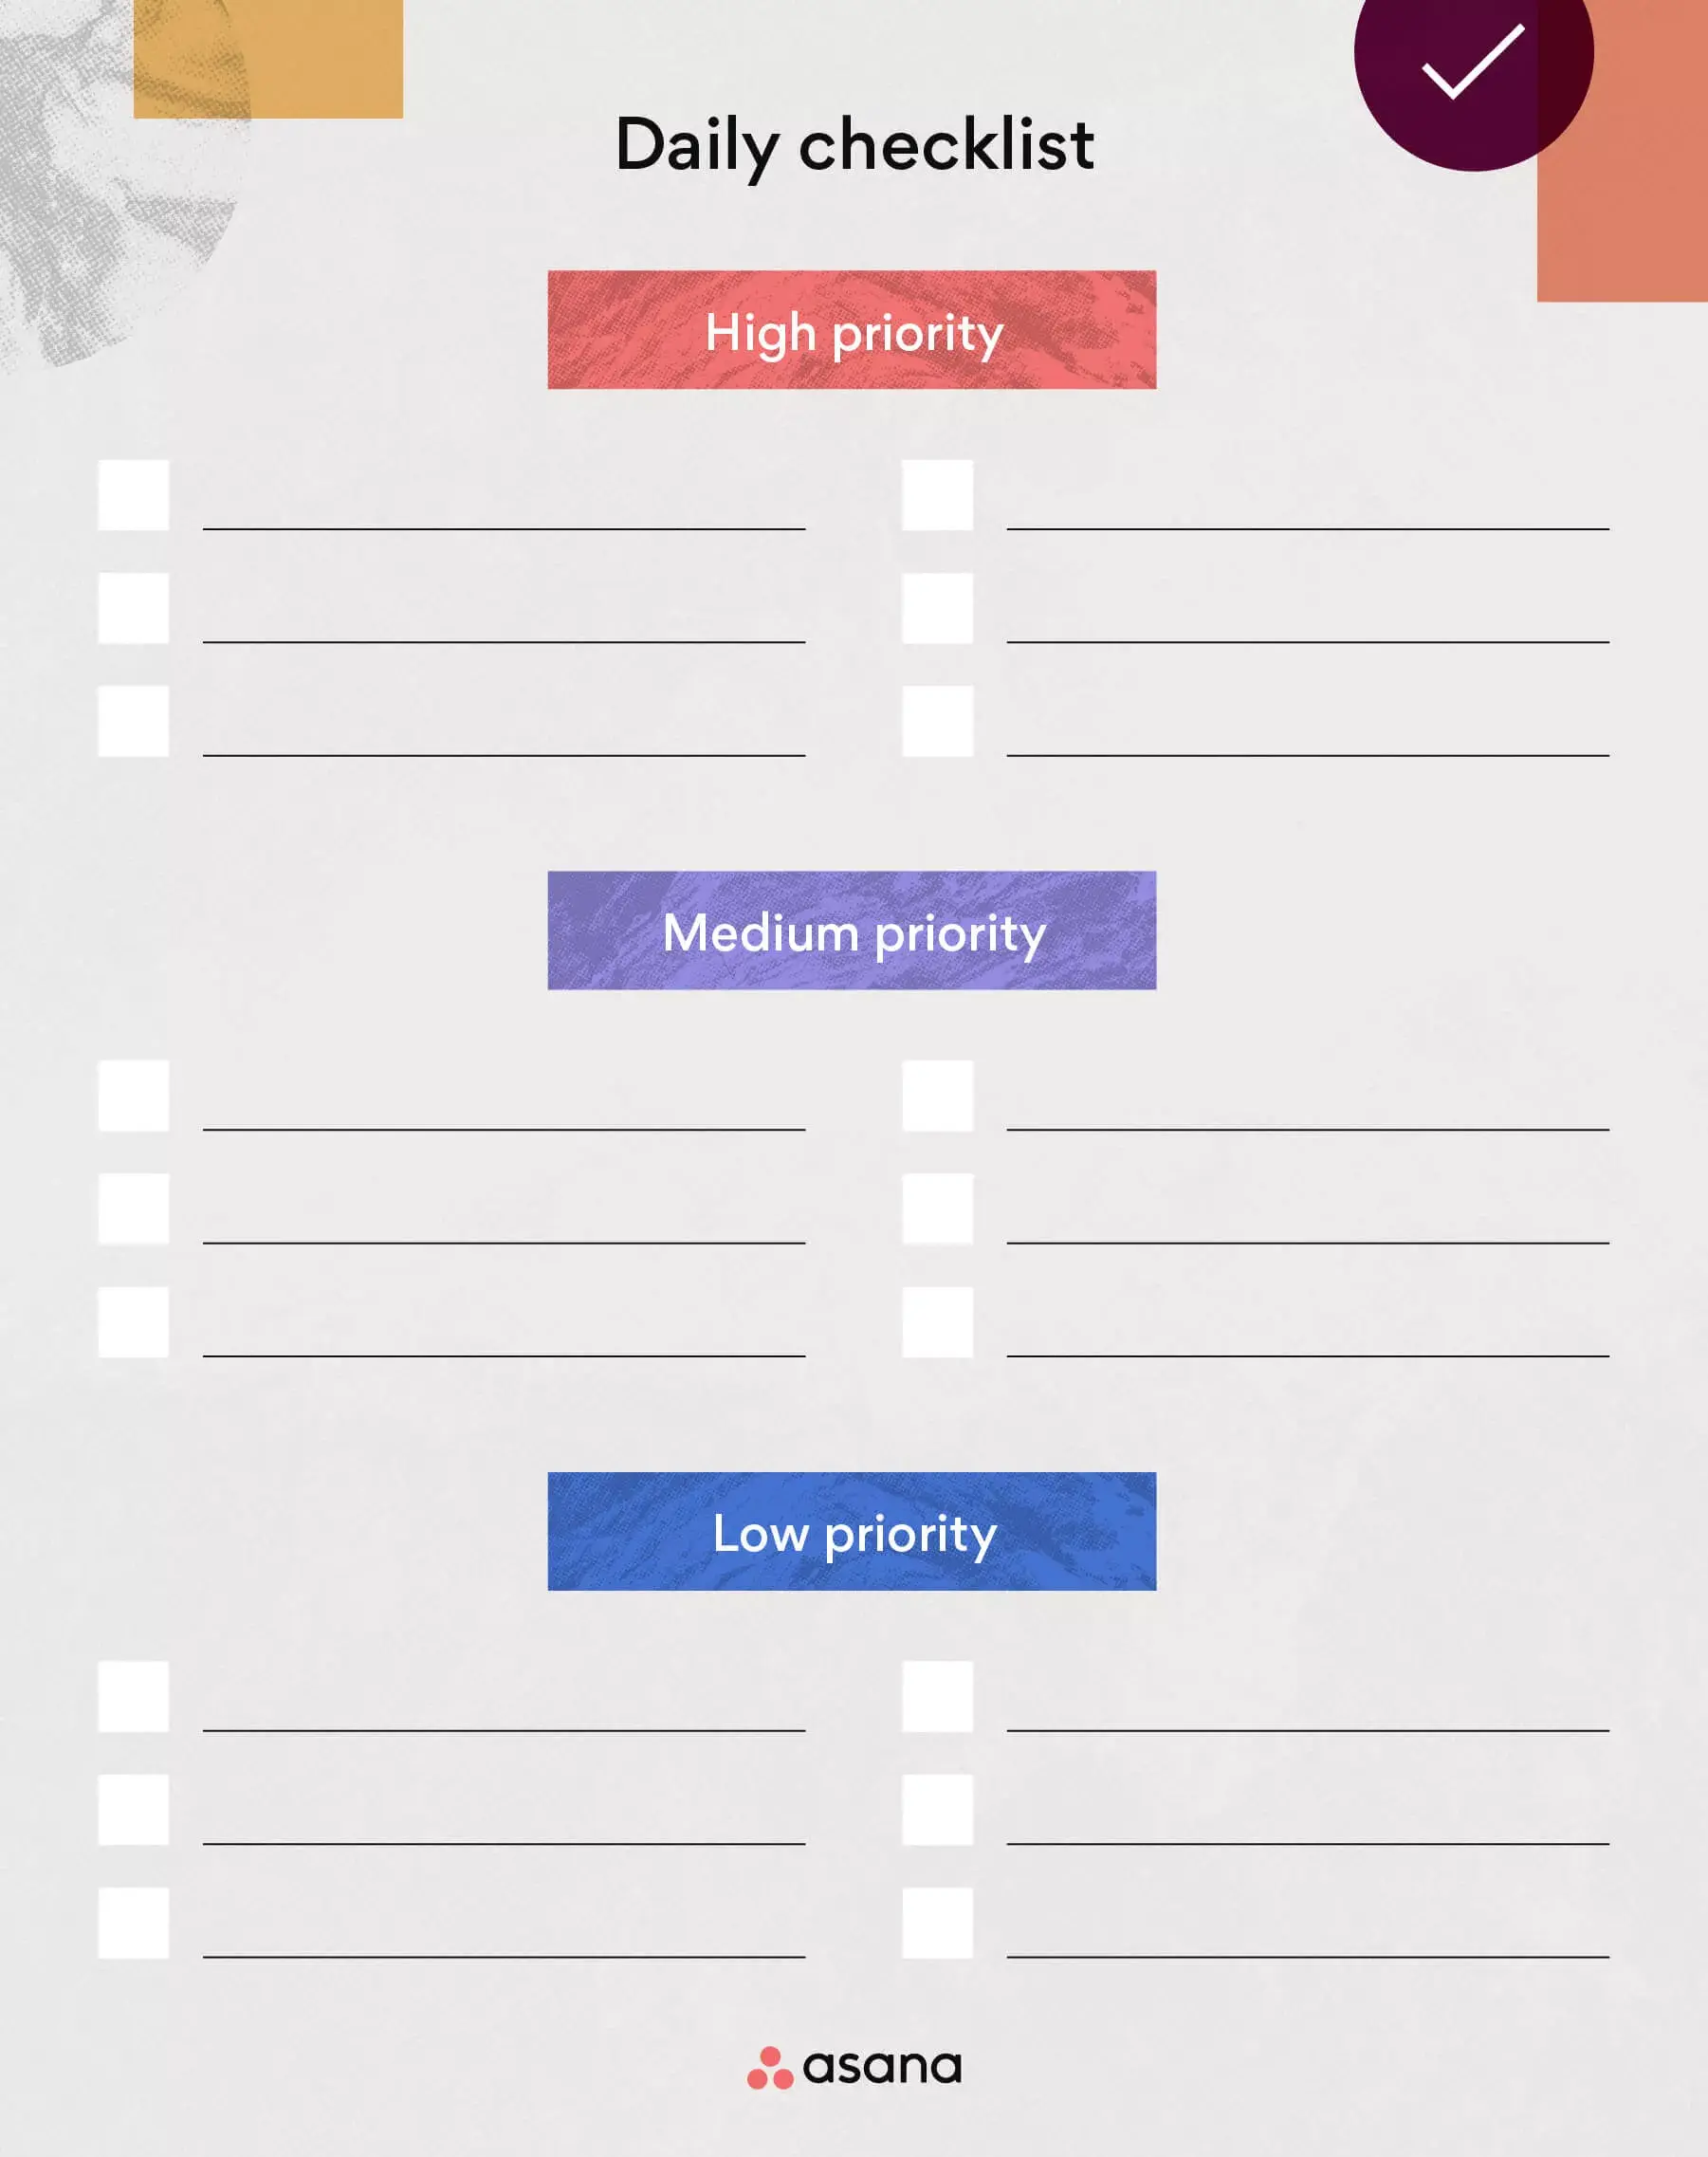 [Inline illustration] Daily checklist template (Example)